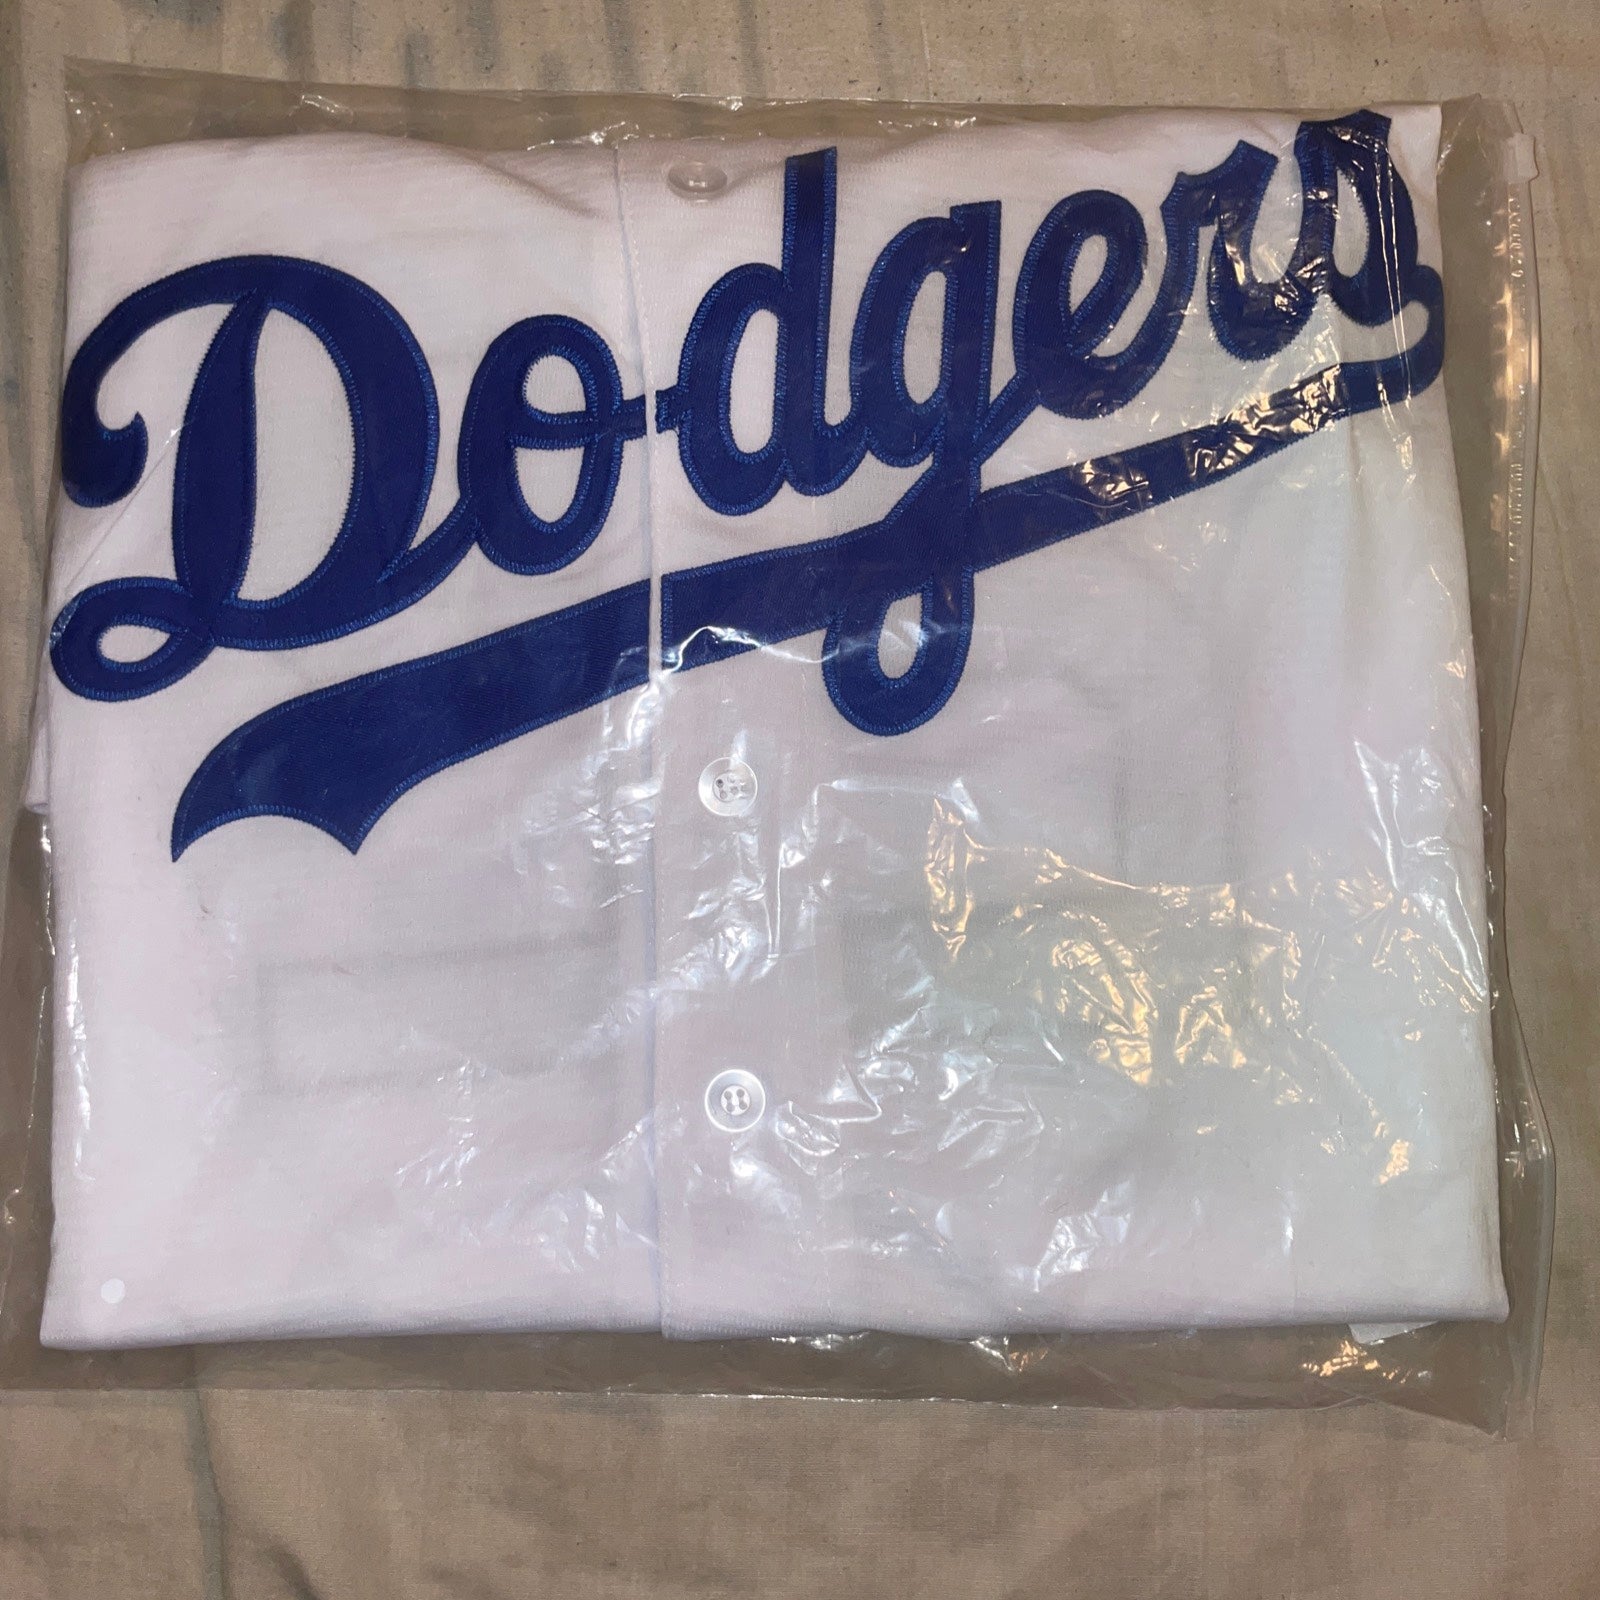 Los Angeles Dodgers Clayton Kershaw Jersey with tags - Size Men's